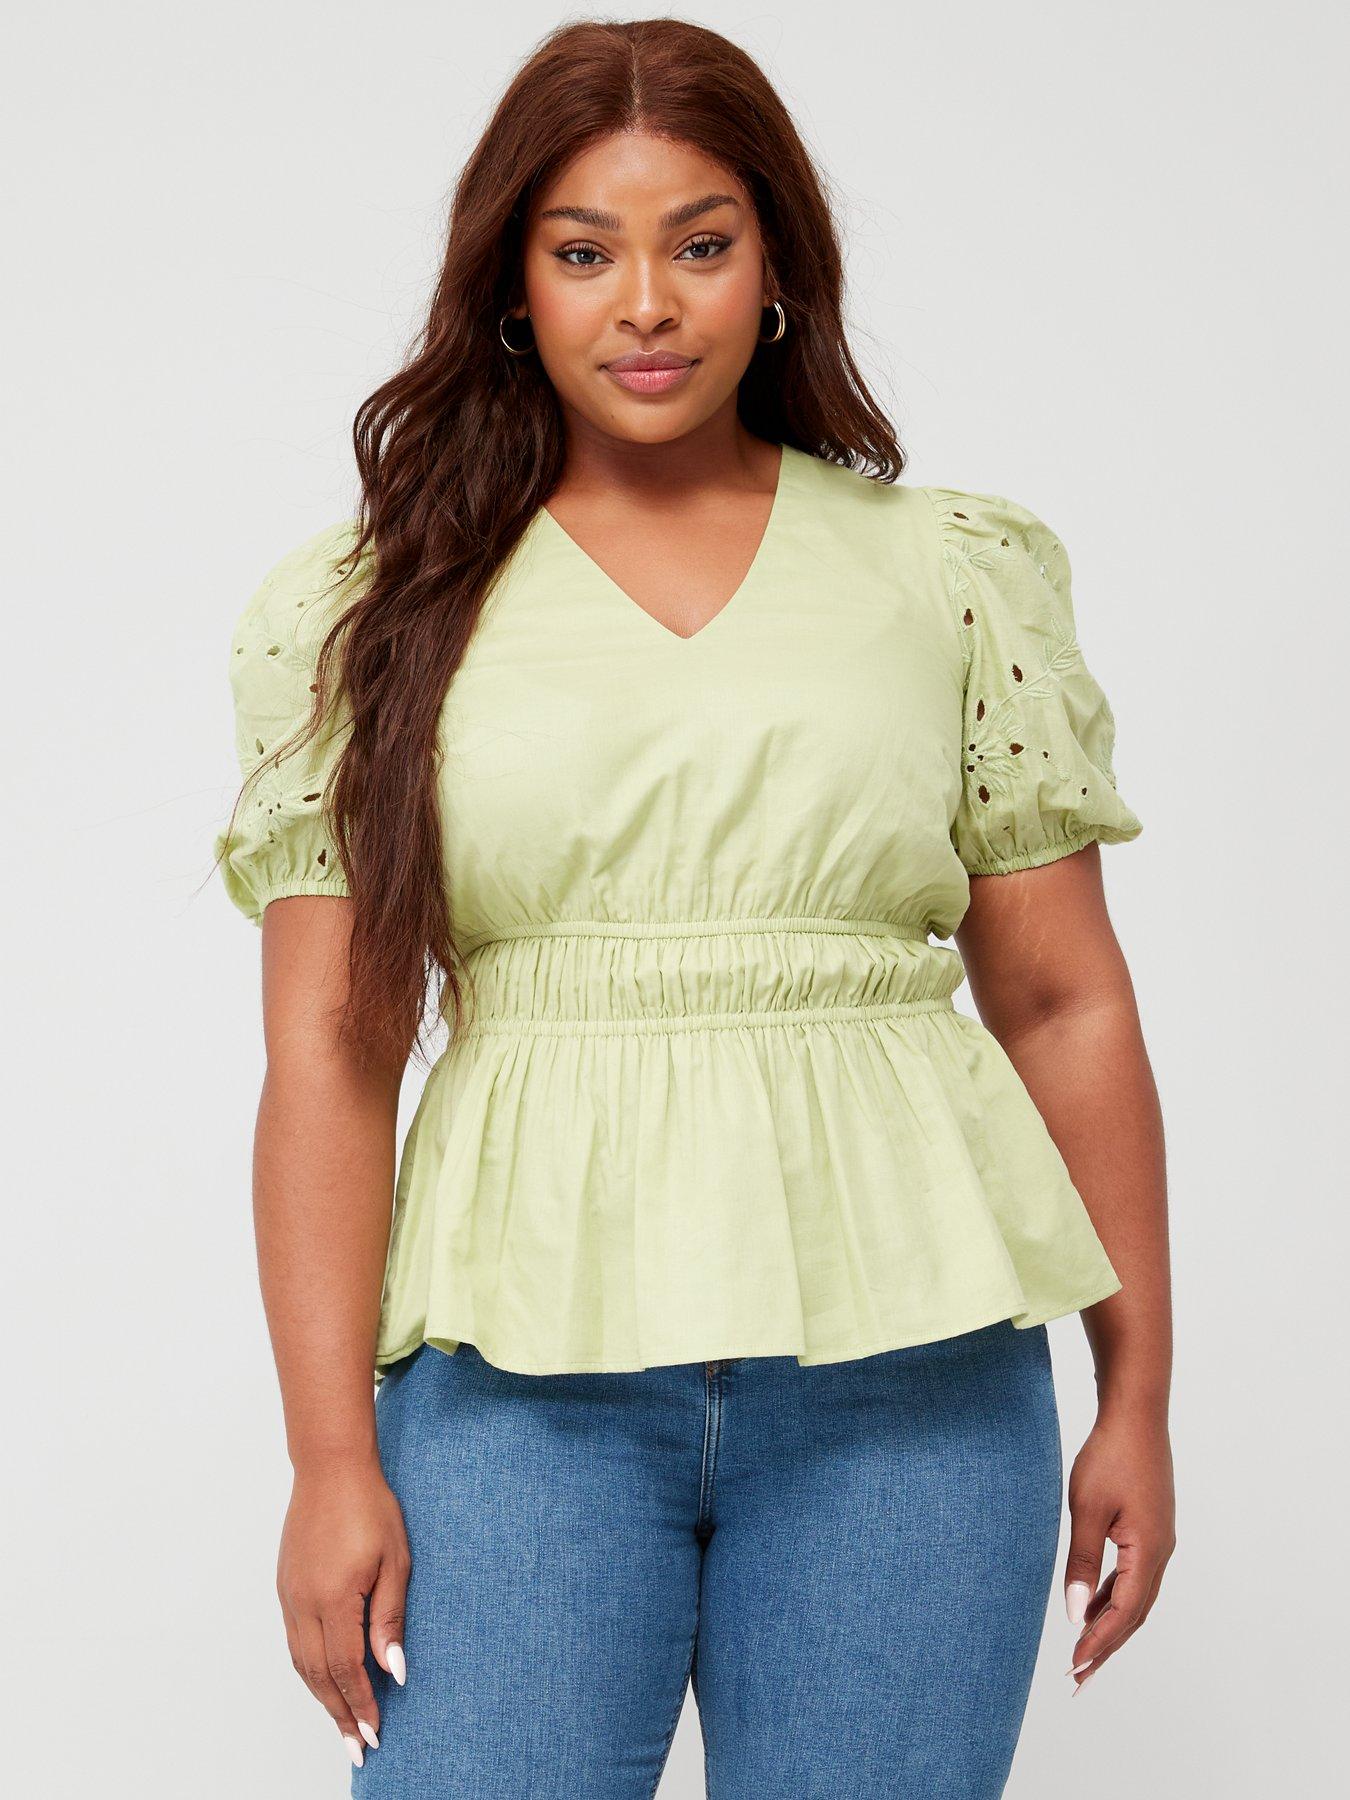 Blouses, Going Out Tops, Plus Size, Blouses & shirts